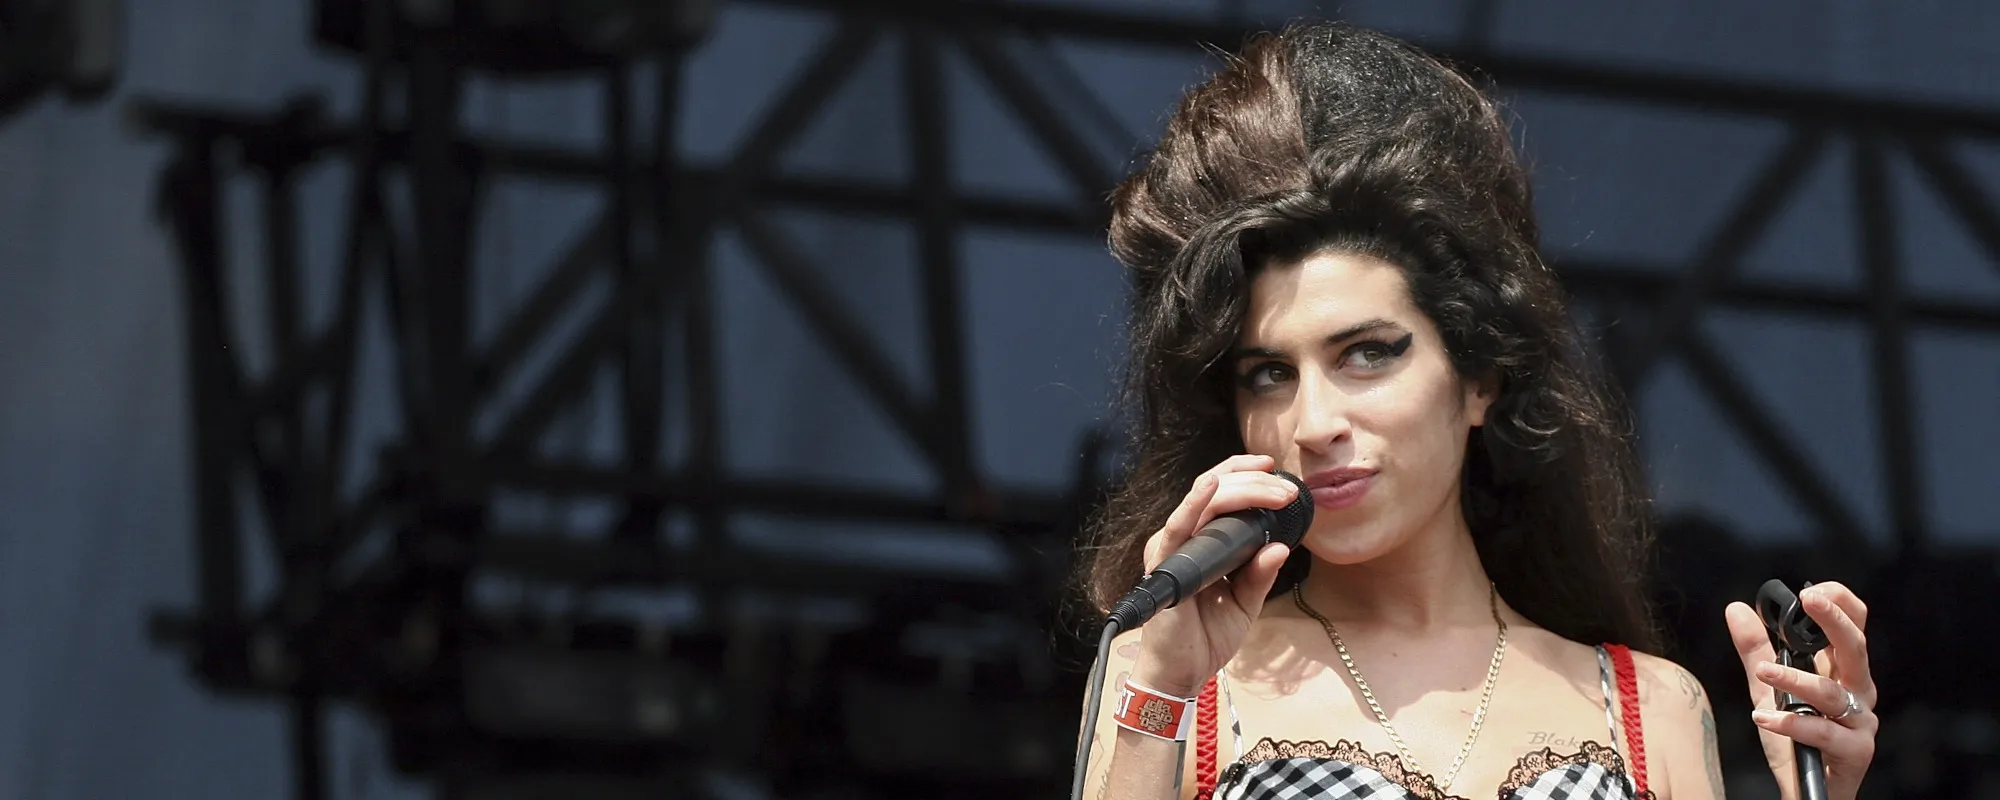 The Meaning Behind “Back to Black” by Amy Winehouse and the Painful Breakup that Inspired It